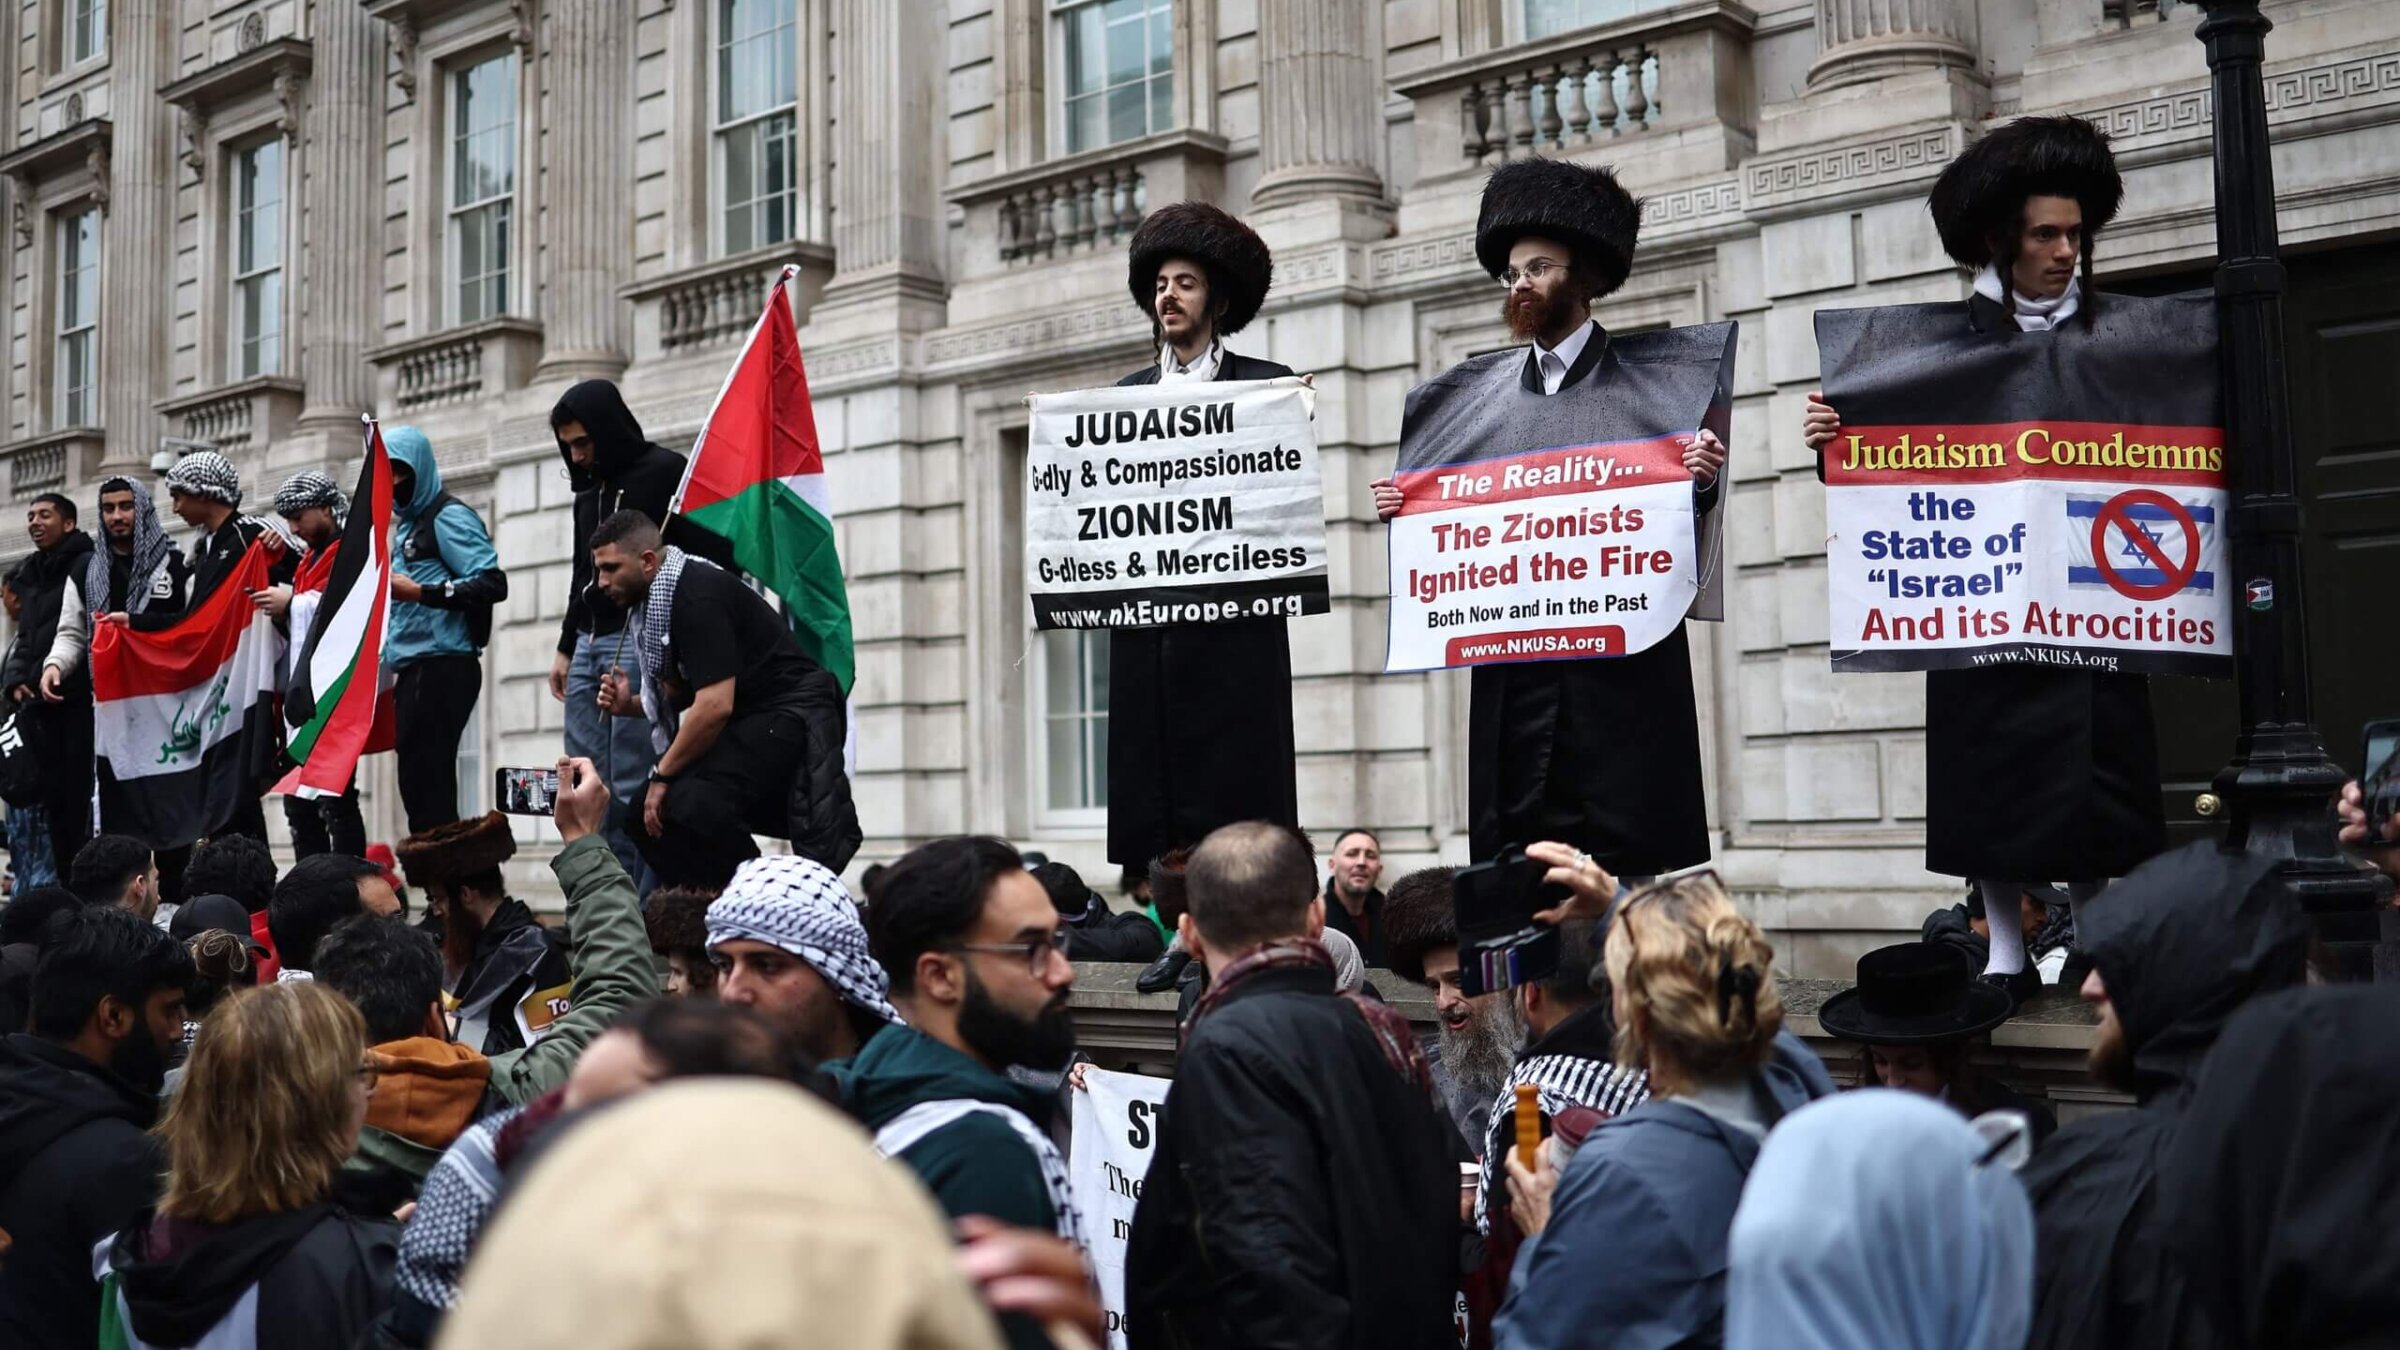 Members and supporters of Neturei Karta take part in a "March For Palestine" in London in October.